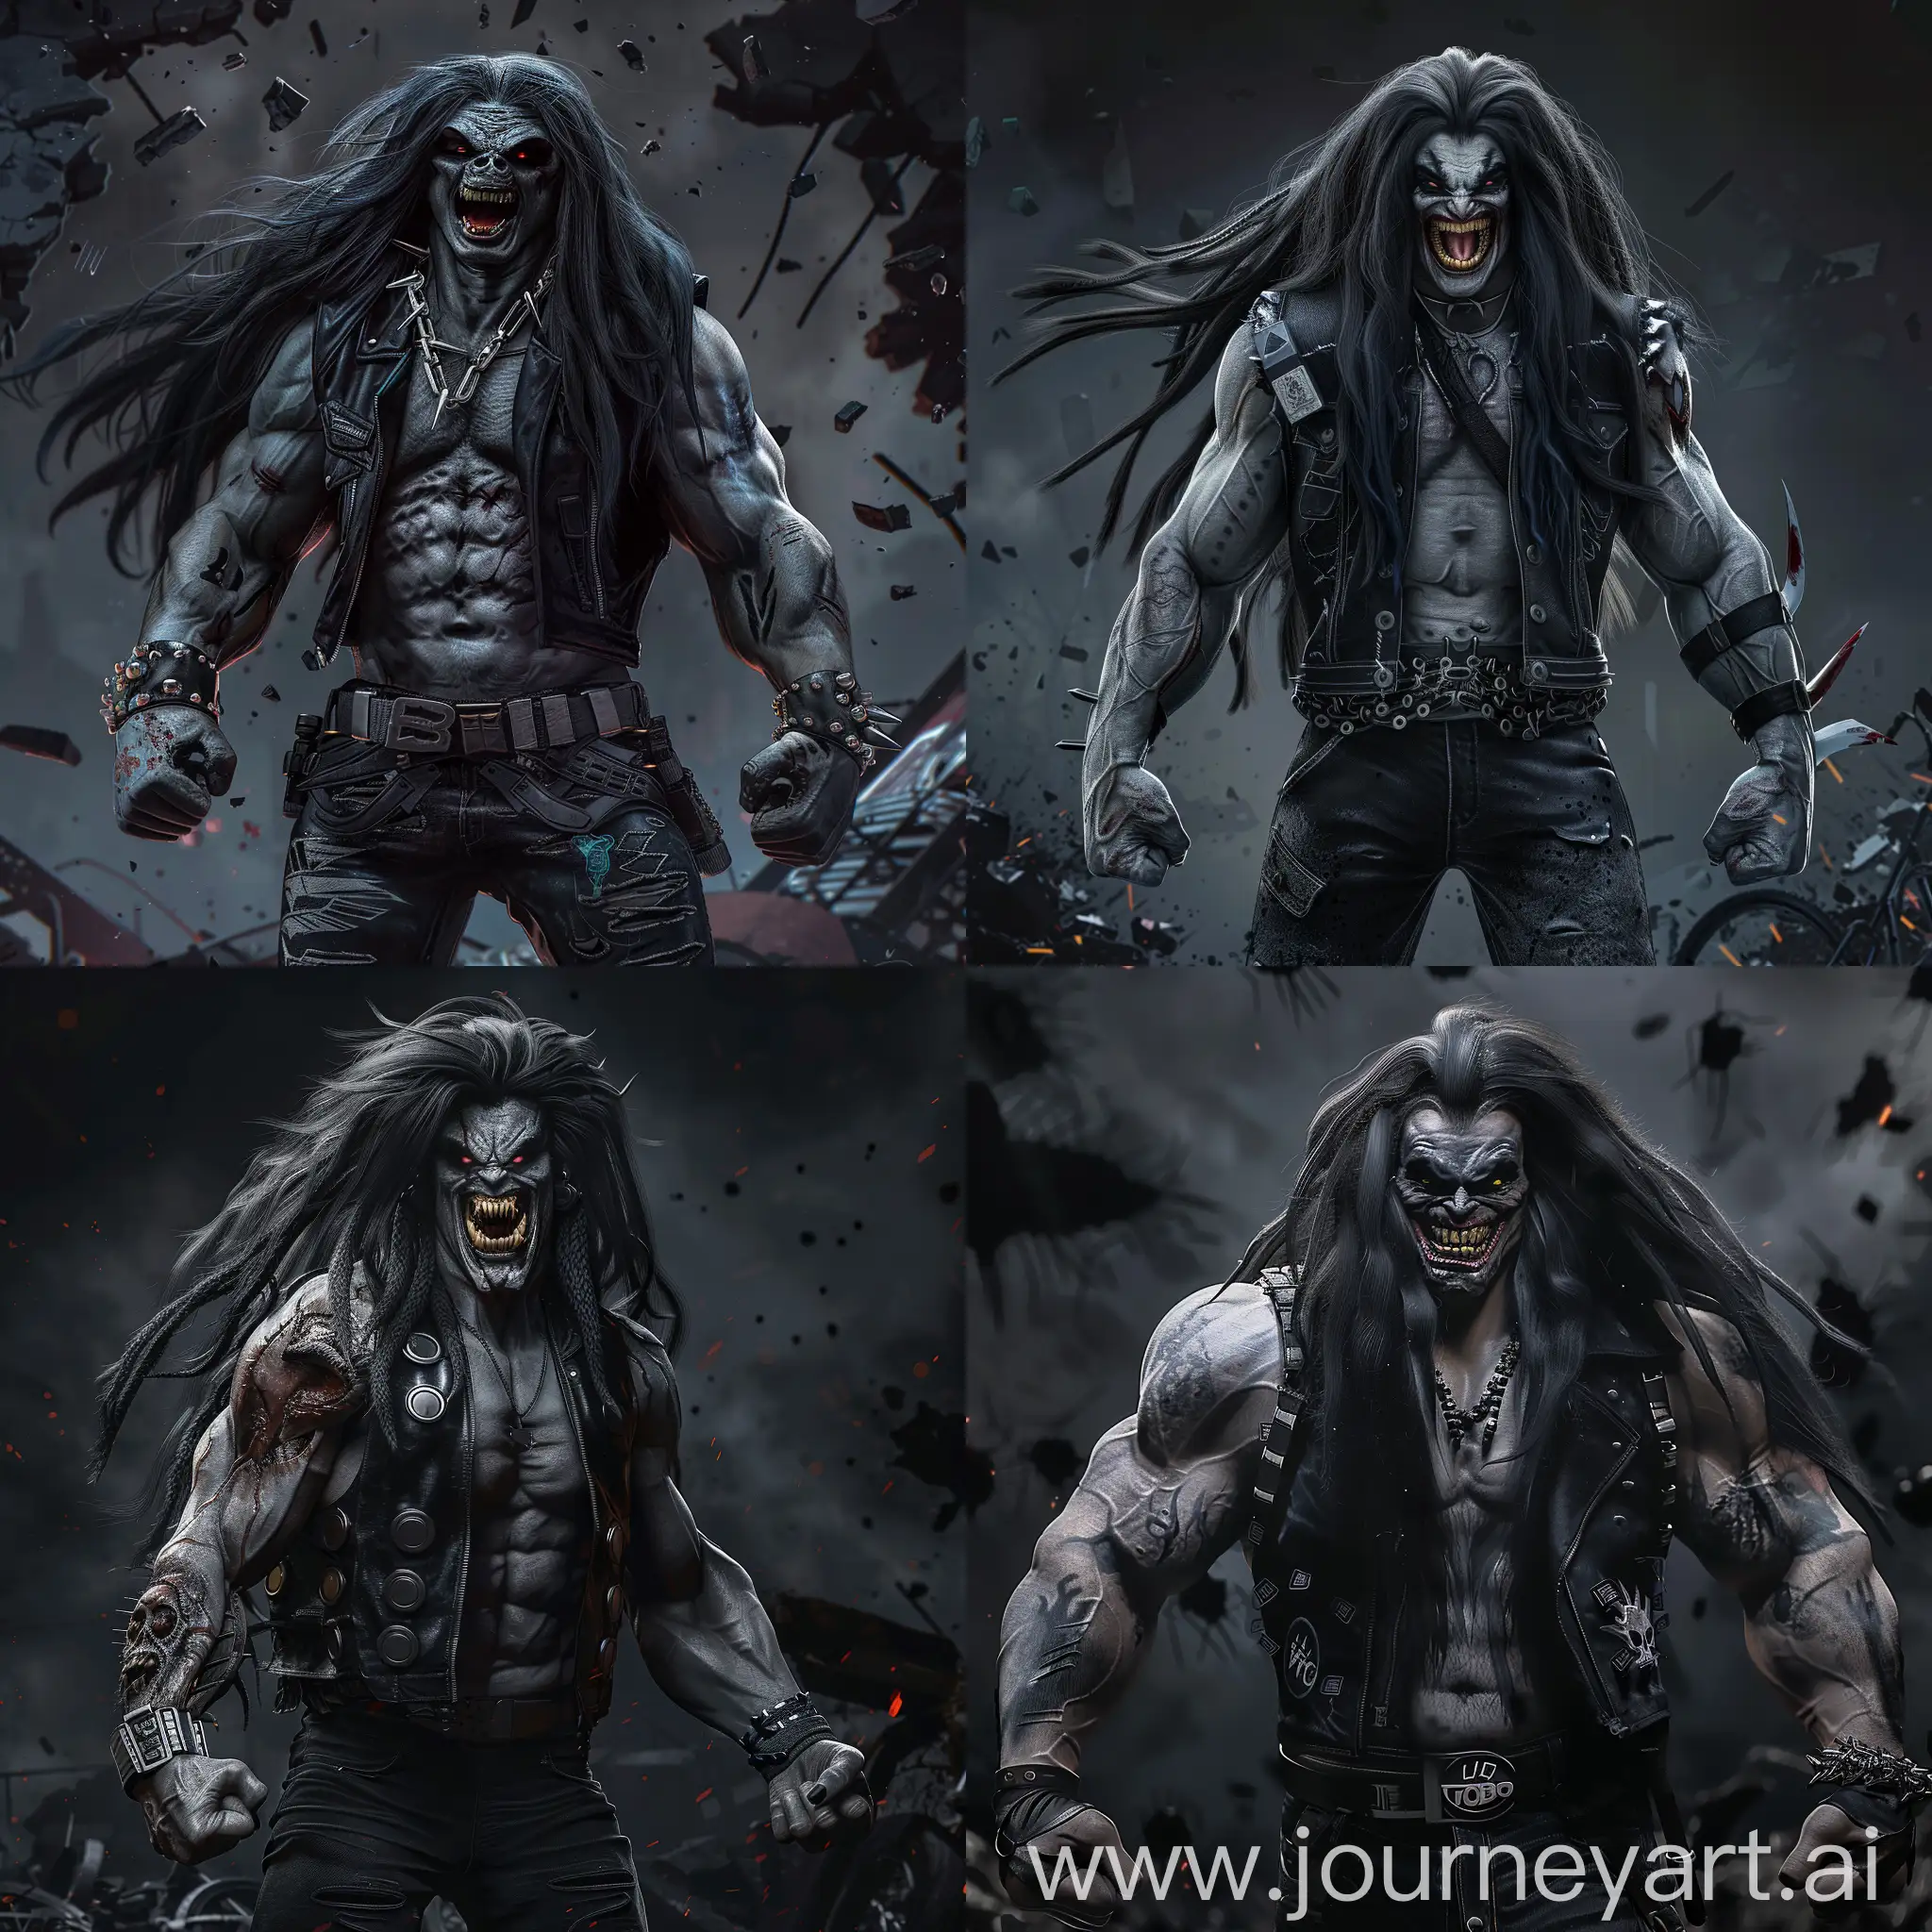 Full growth, Lobo from DC universe, black long hair and a black biker vest, evil grin, Lobo mixed venom, full growth pose, big muscles, gray skin, realism, ultra detail dark background with destruction, cinematic, 8k, hd